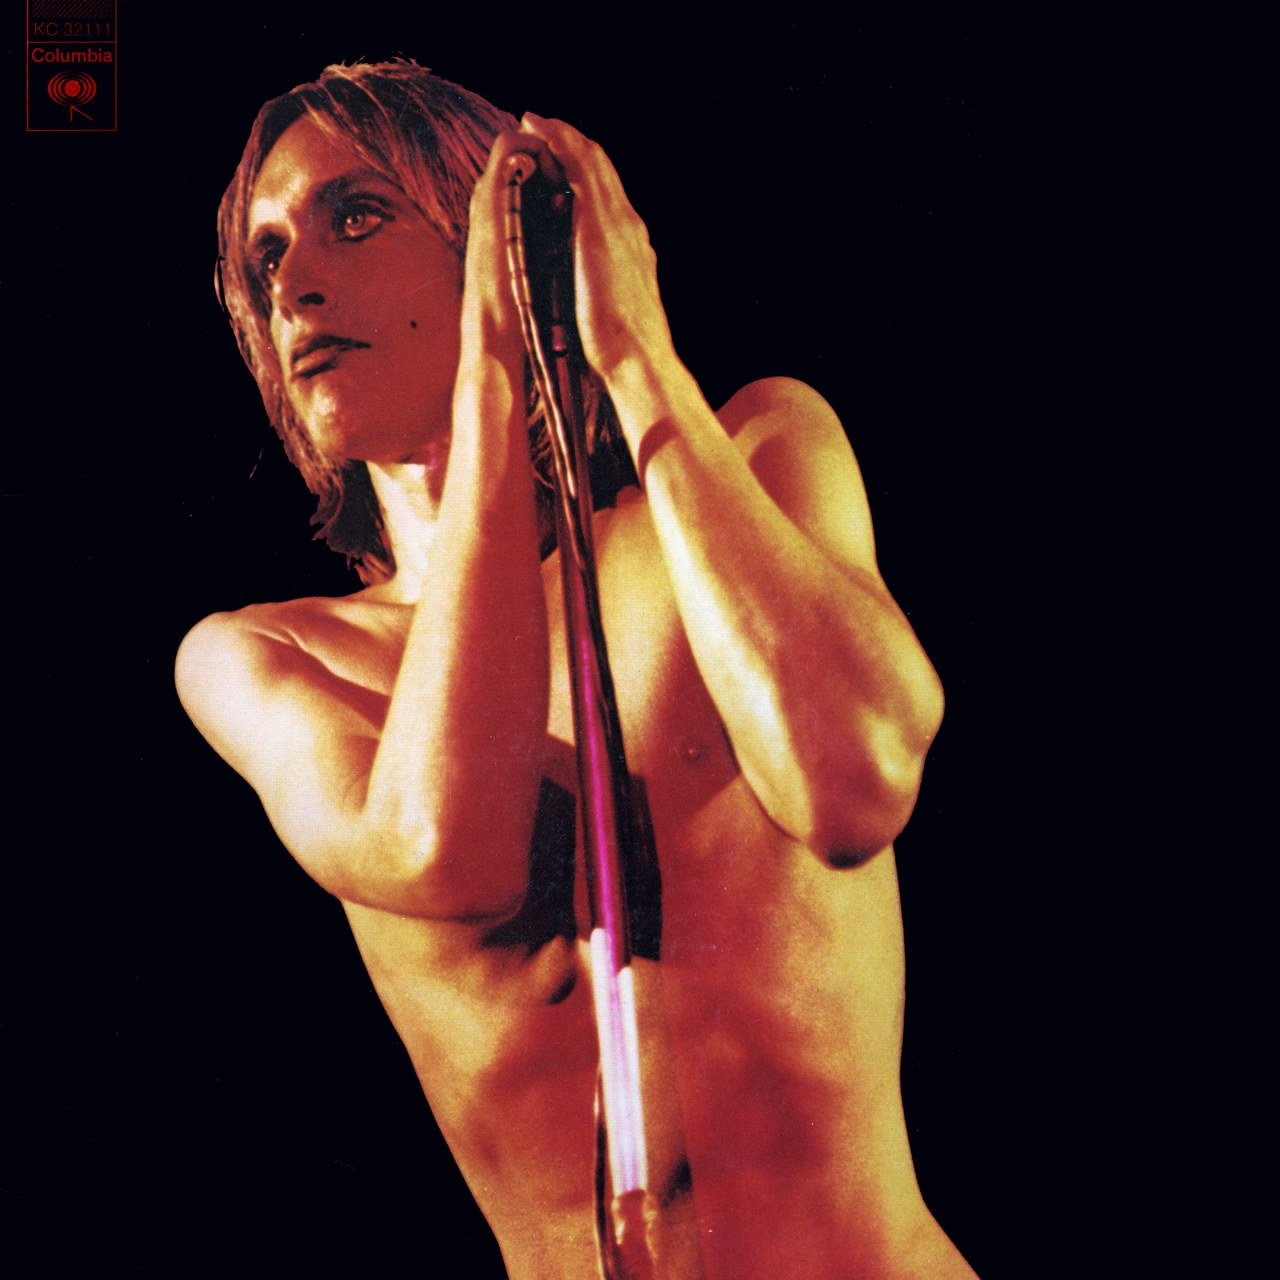  Iggy Pop and The Stooges, Raw Power (1973), foto di Mick Rock